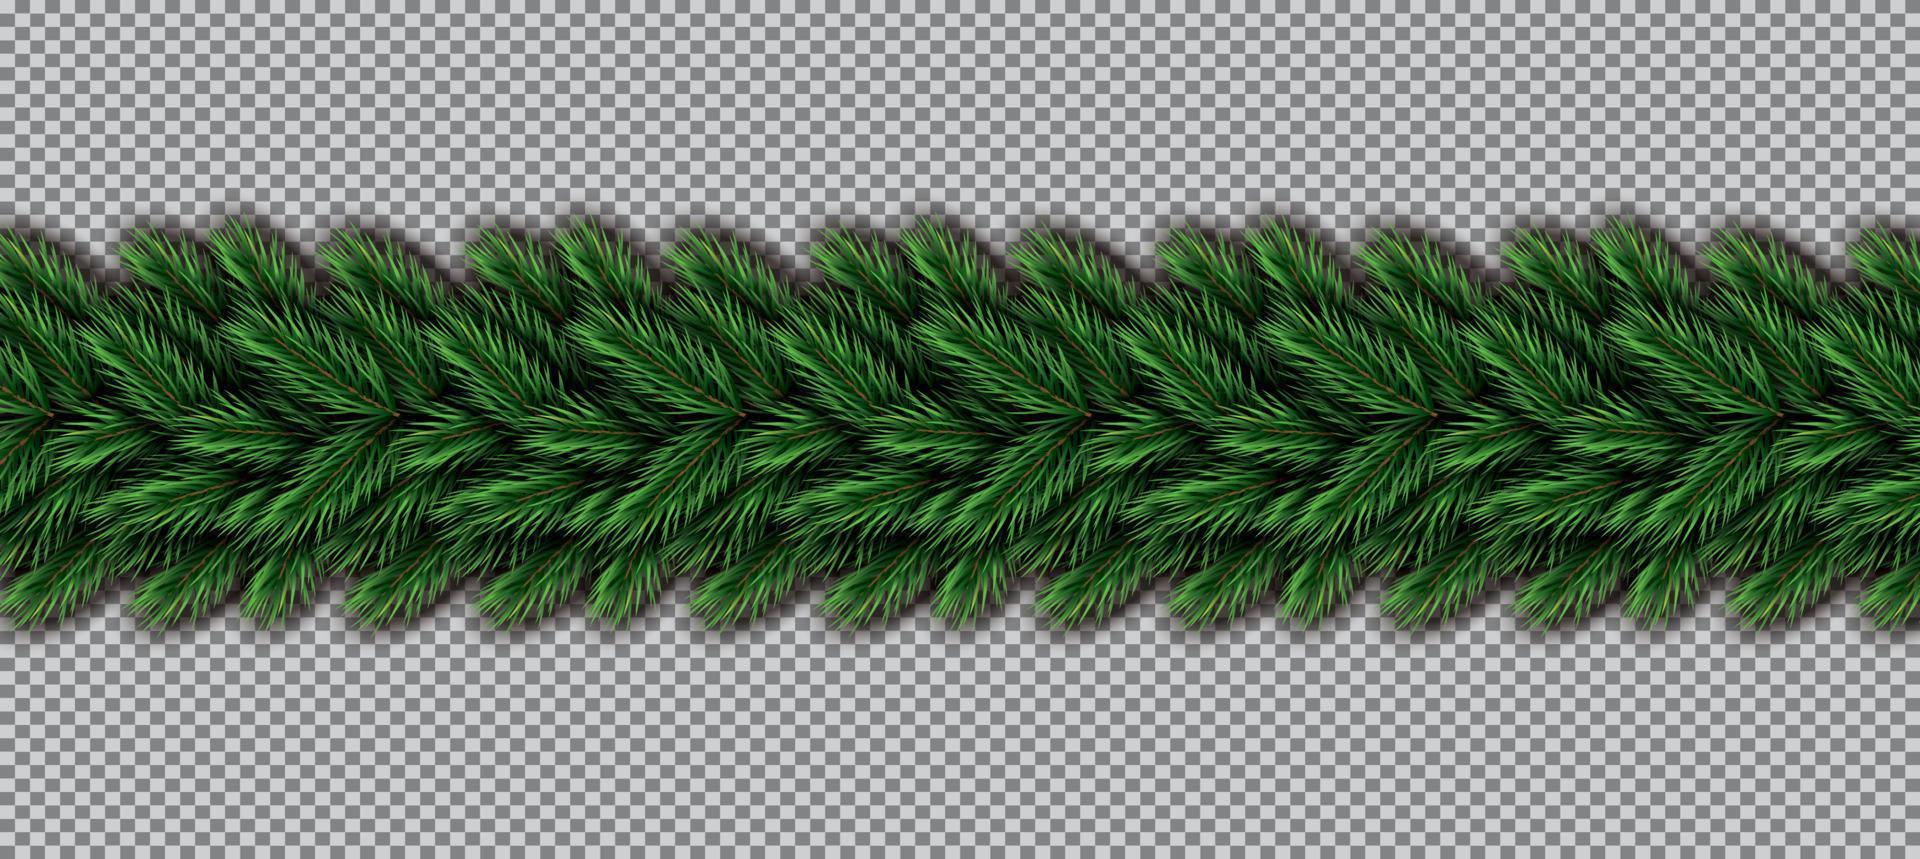 Border with Christmas Tree Branches on Transparent Background. vector